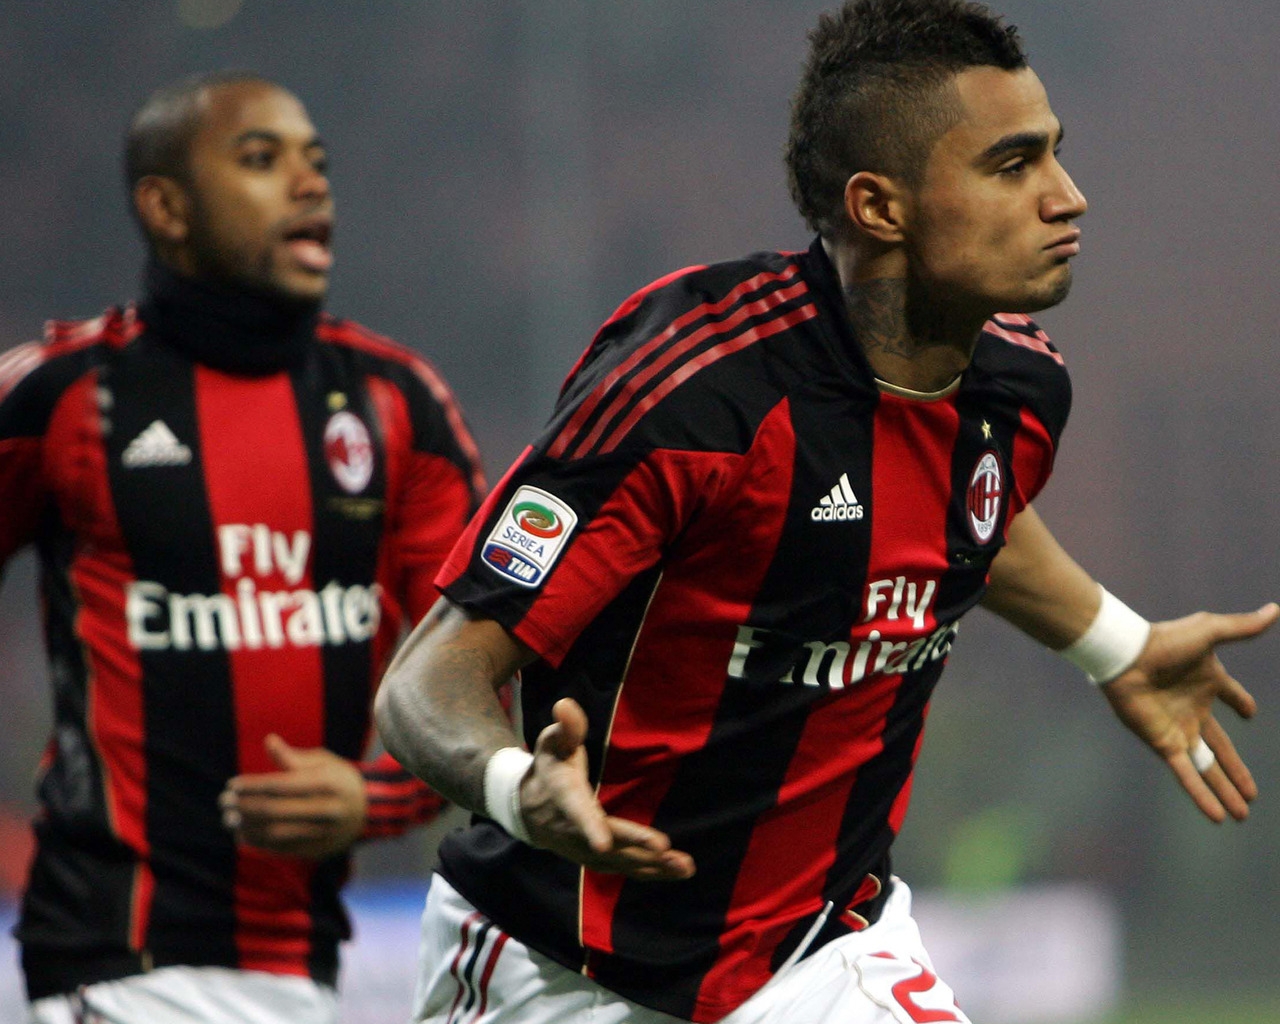 Kevin Prince Boateng for 1280 x 1024 resolution